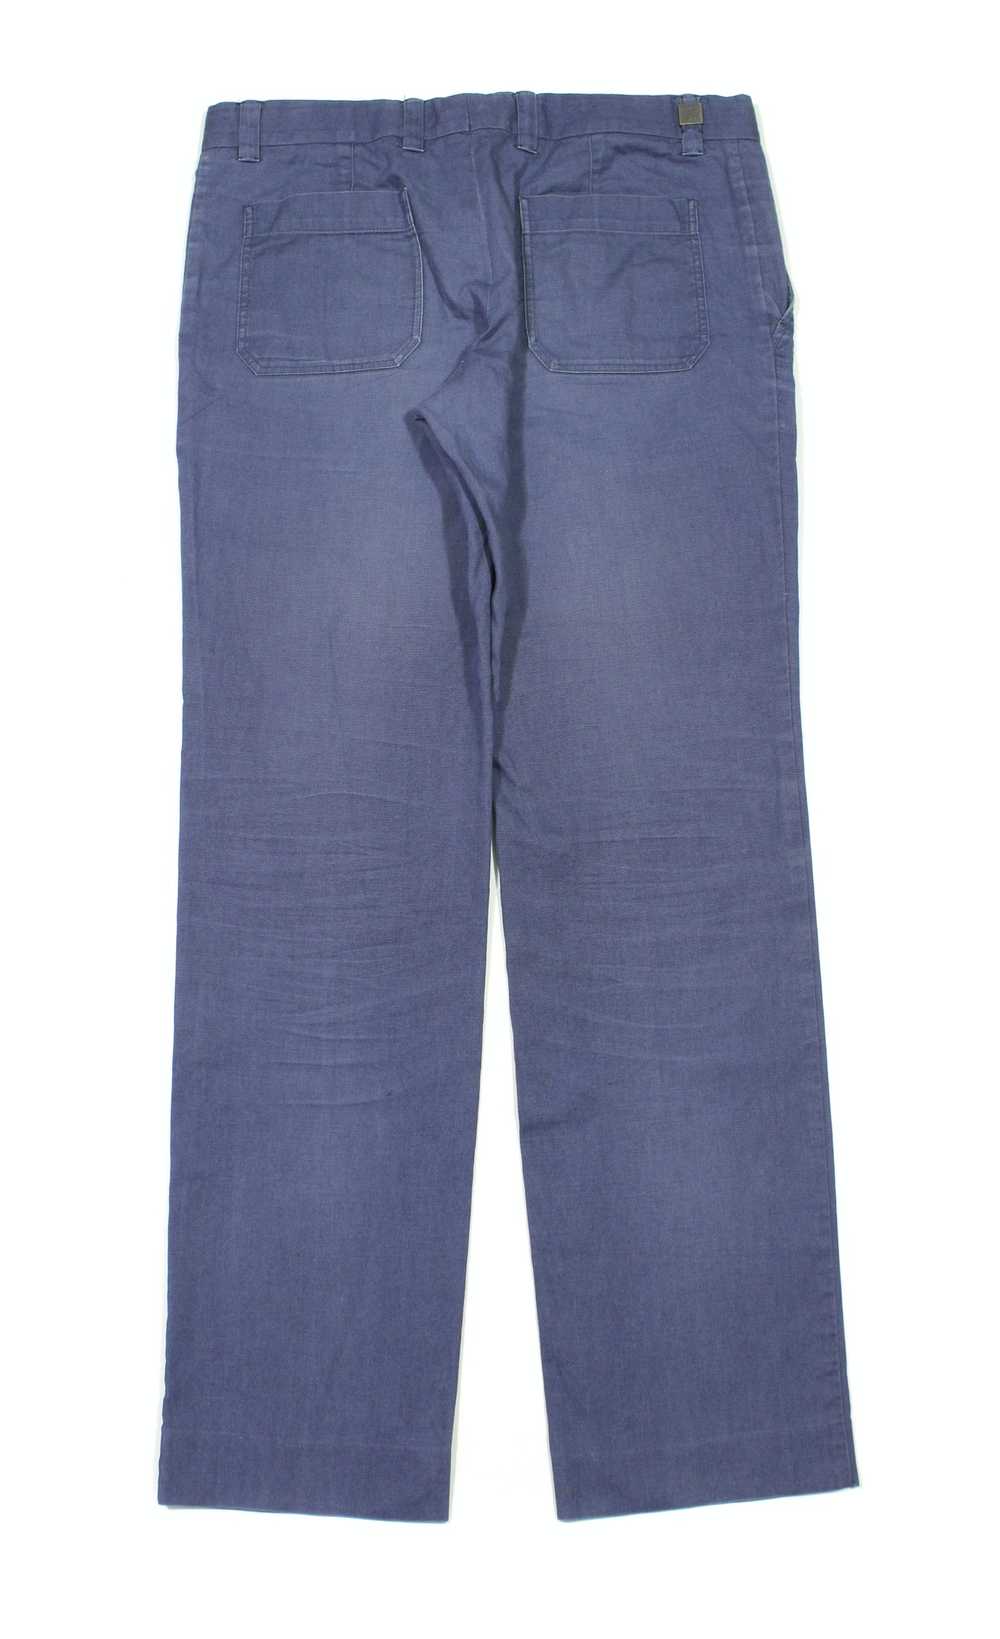 Gucci 2010 Cotton Pants Skinny Fit - image 2